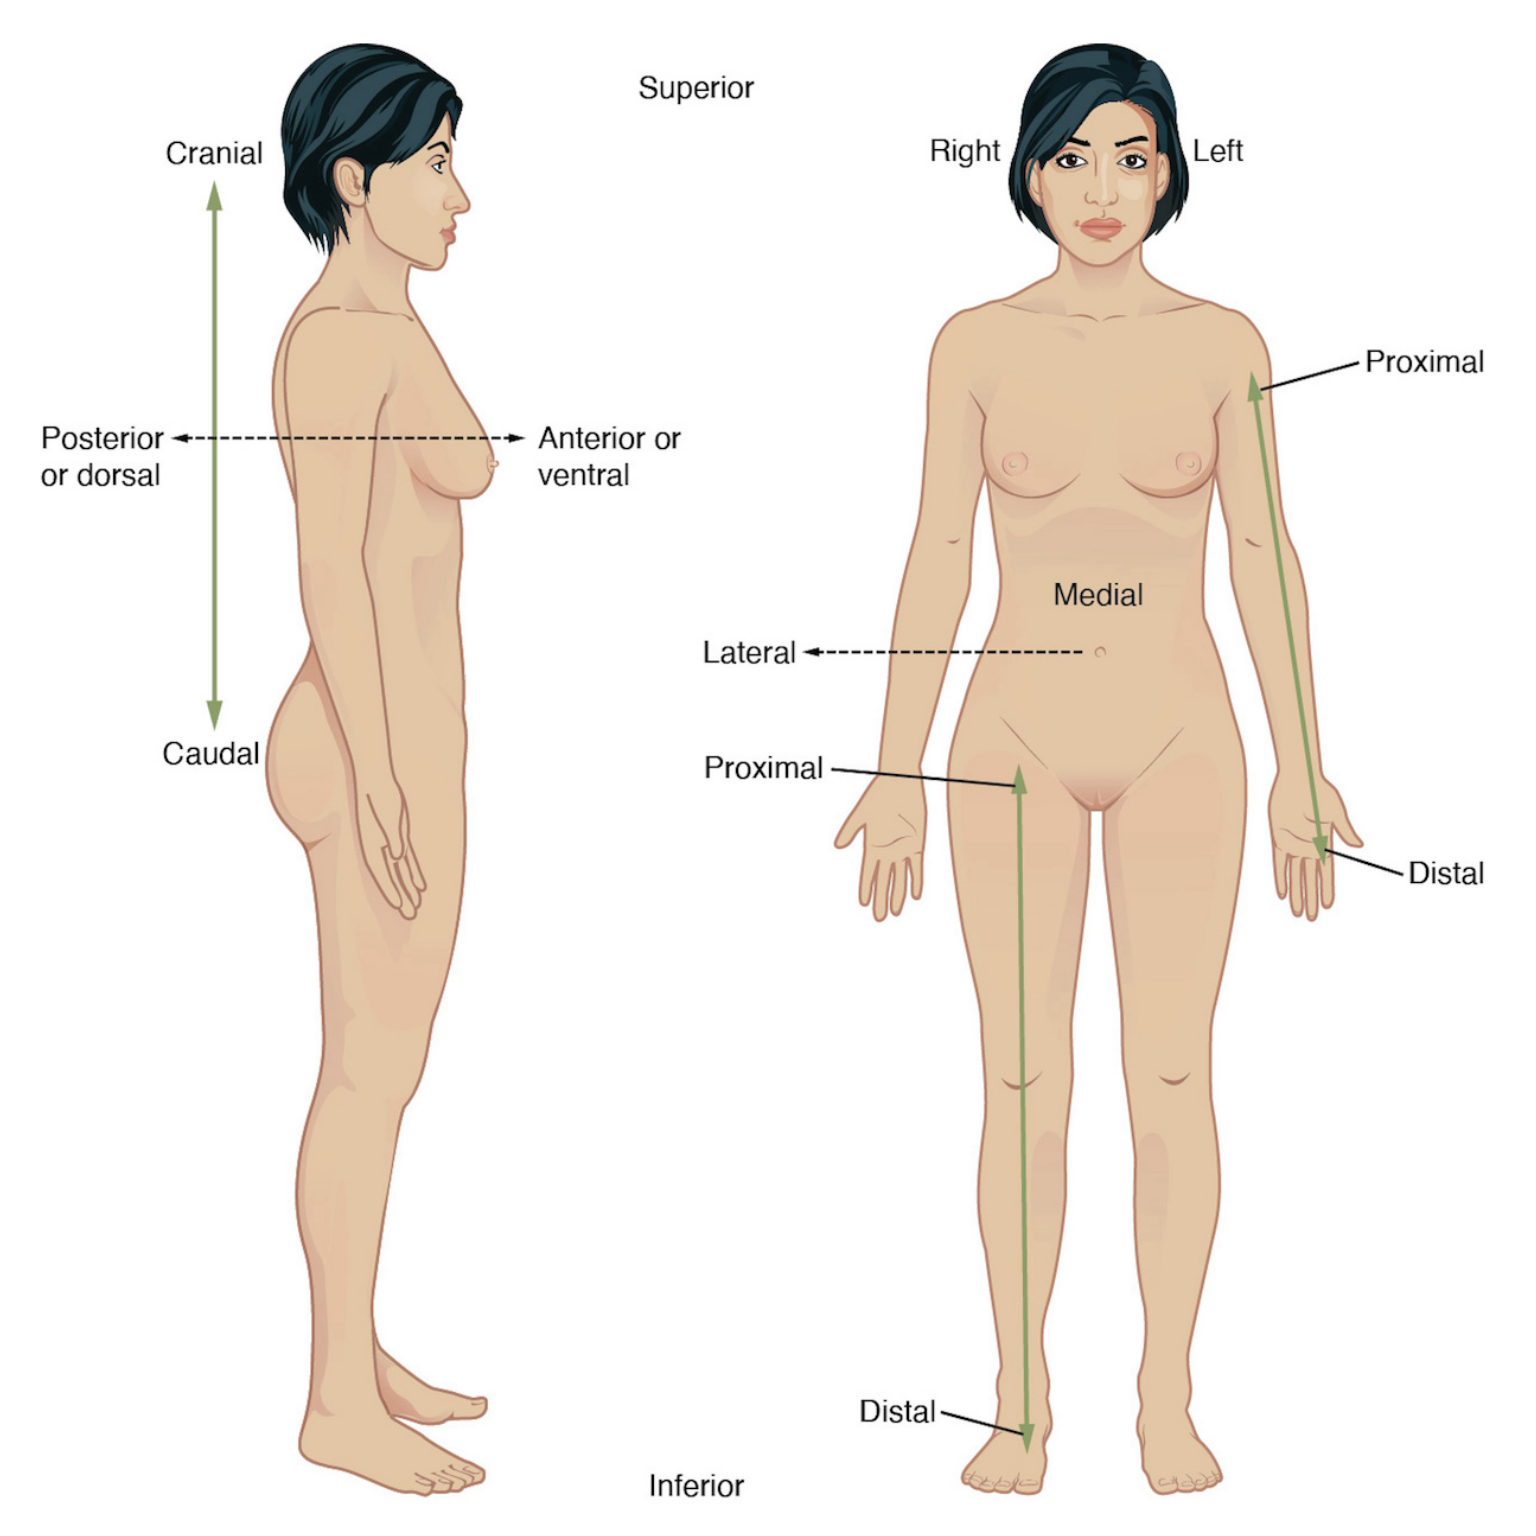 Paired directional terms are shown as applied to the human body. he cranial-caudal arrow runs vertically behind the torso and lower abdomen. The cranial arrow is pointing toward the head, while the caudal arrow is pointing toward the tailbone. The posterior/anterior arrow runs horizontally through the back and chest. The posterior or dorsal arrow points toward the back, while the anterior or ventral arrow points toward the abdomen. On the anterior view, the proximal/distal arrow is on the right arm. The proximal arrow points up toward the shoulder, while the distal arrow points down toward the hand. Medial to lateral is shown by a horizontal arrow on the abdomen. Medial structures are toward the midline of the body.  Left and right are reversed if you examine the figure from the anterior view.